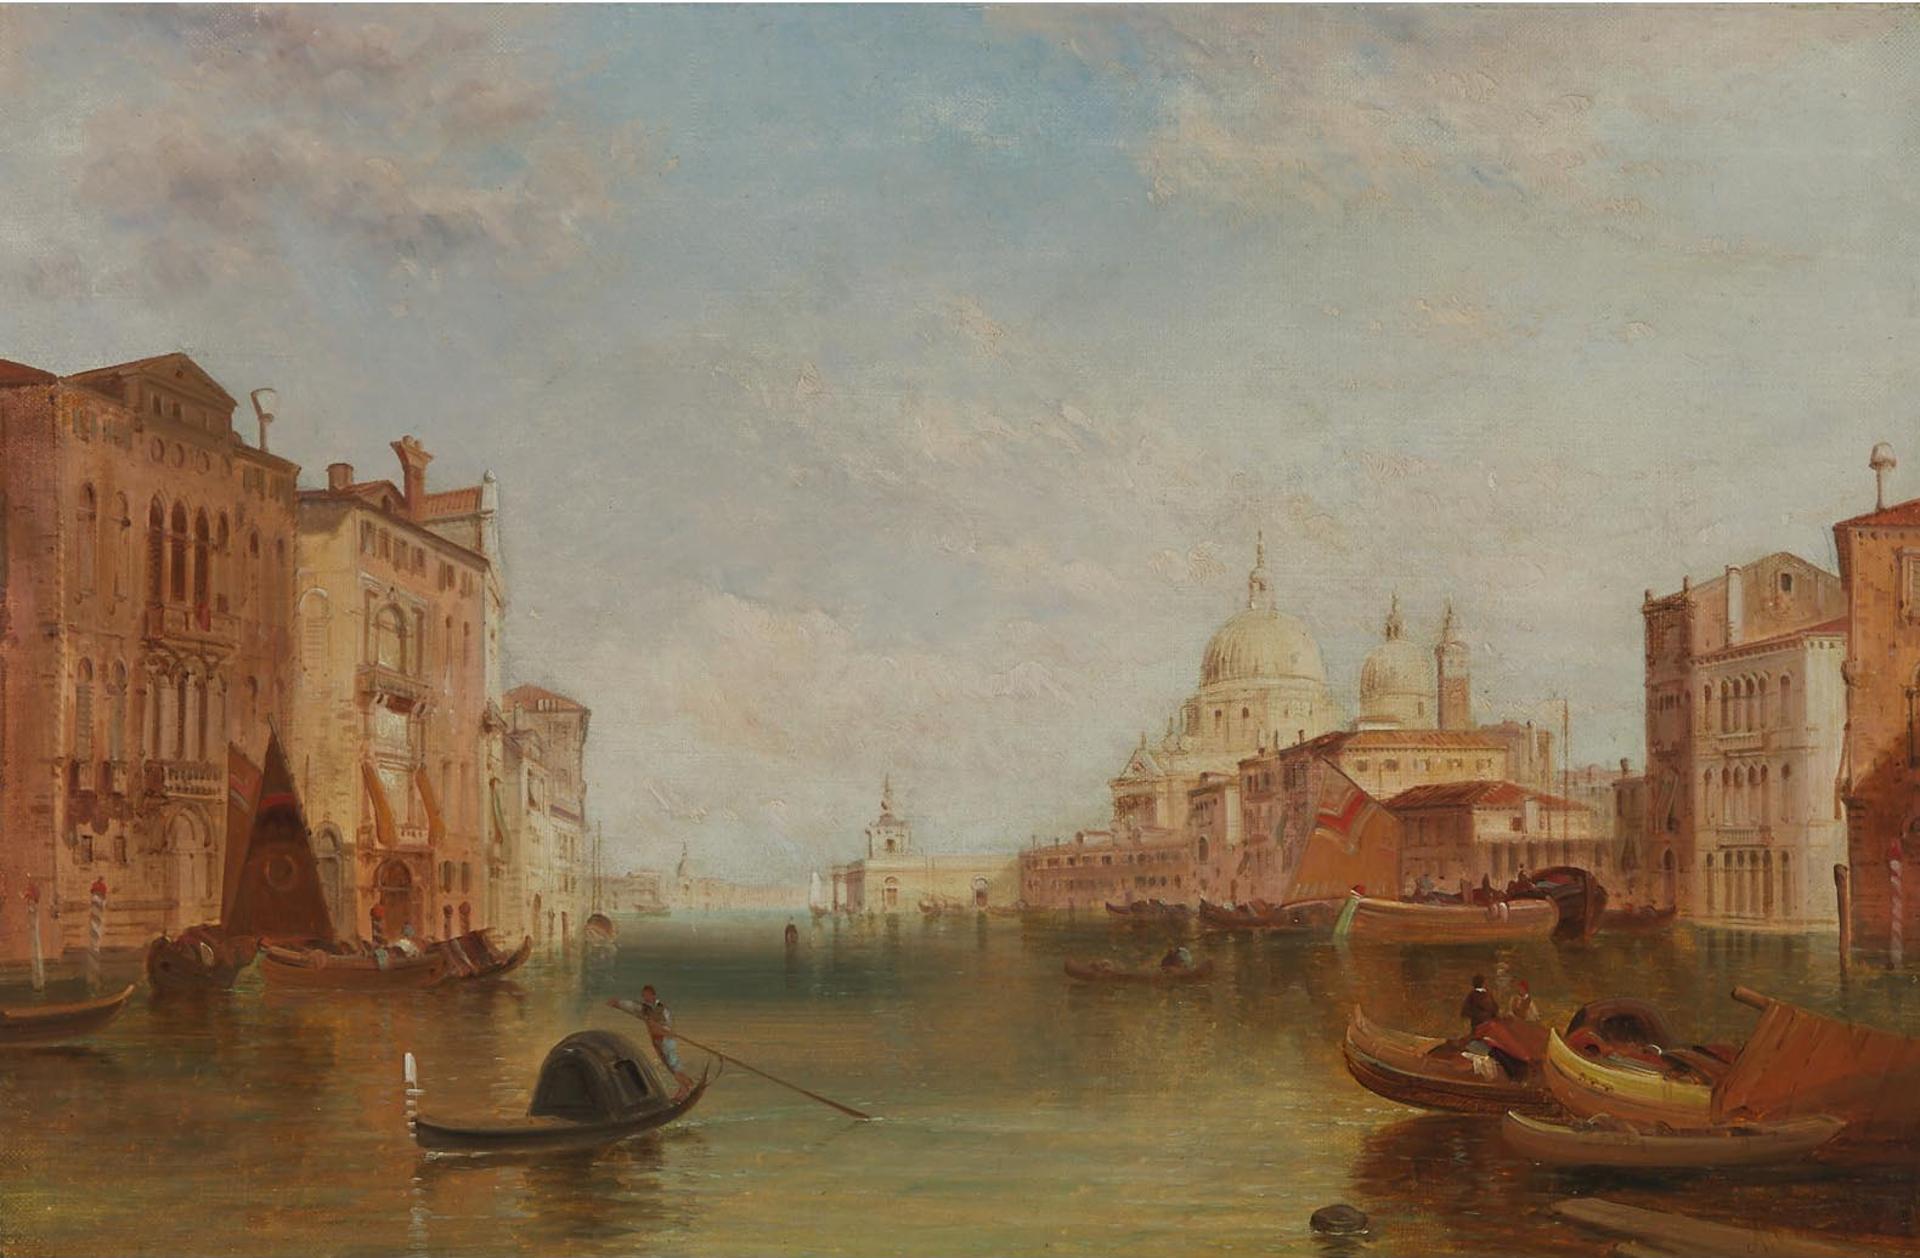 Alfred Pollentine (1836-1890) - The Grand Canal, Venice